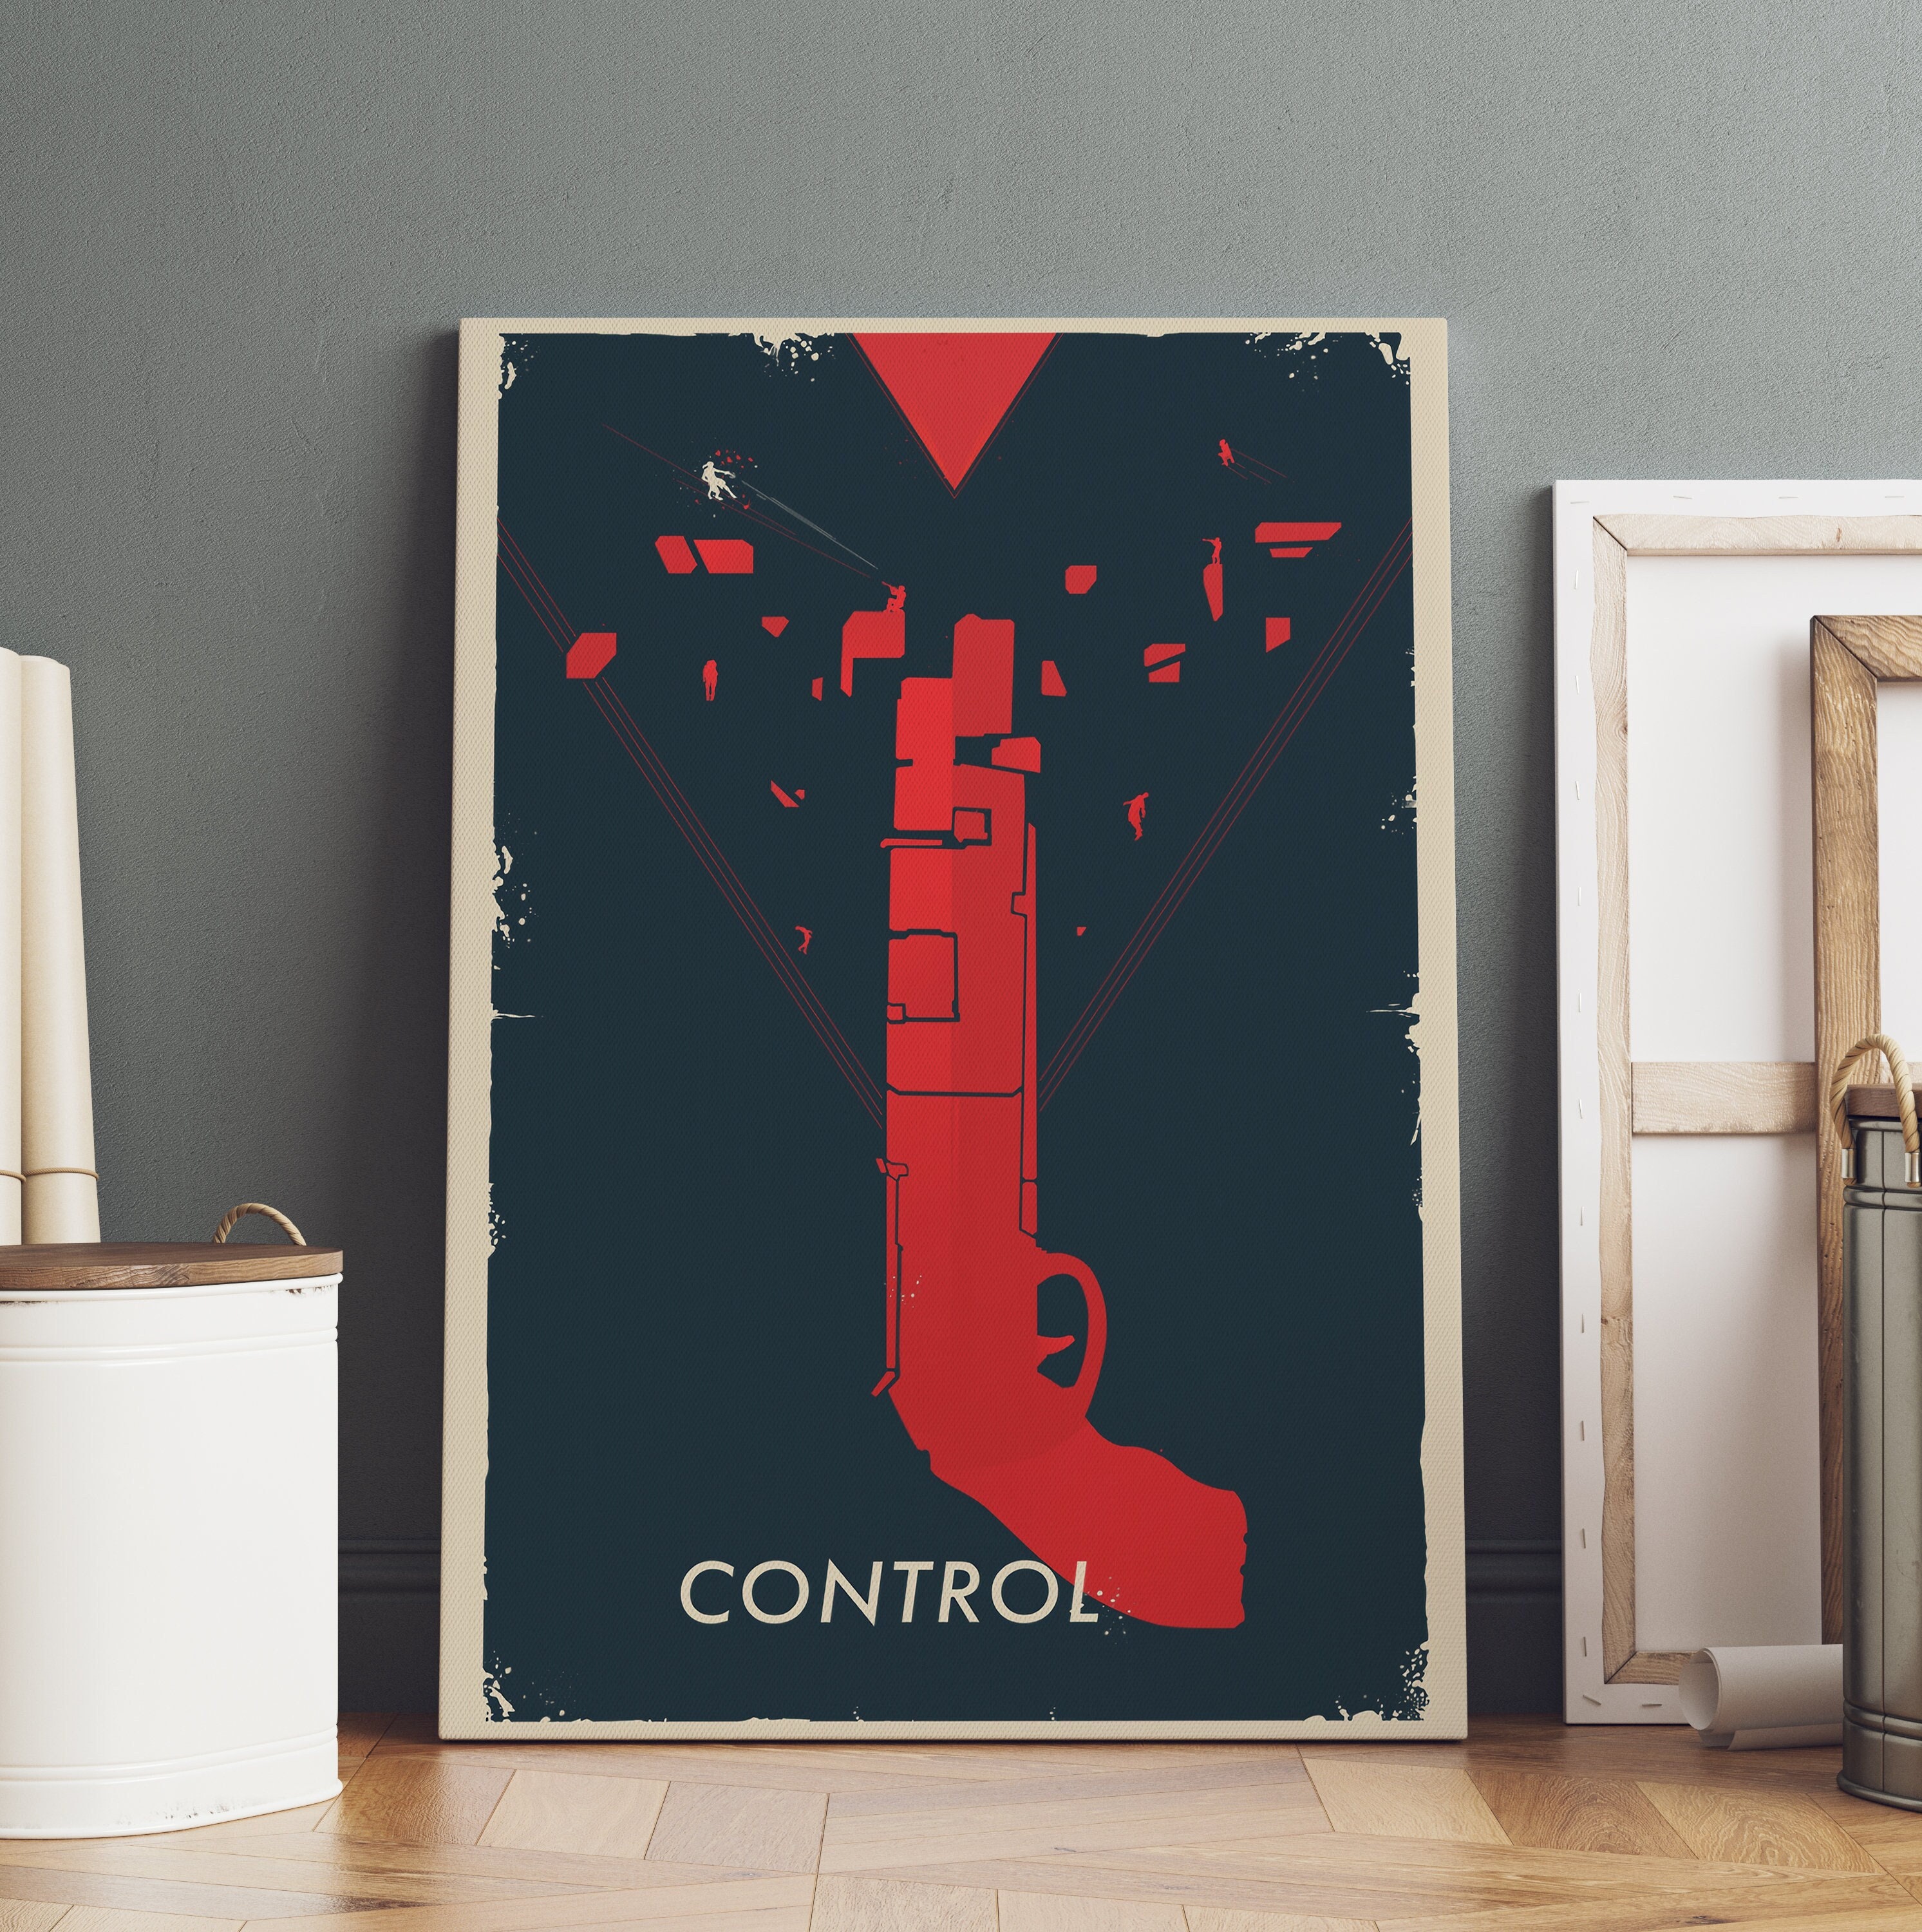 2021 CONTROL Framed Print Ad/Poster PS4 Xbox One Remedy Art Max